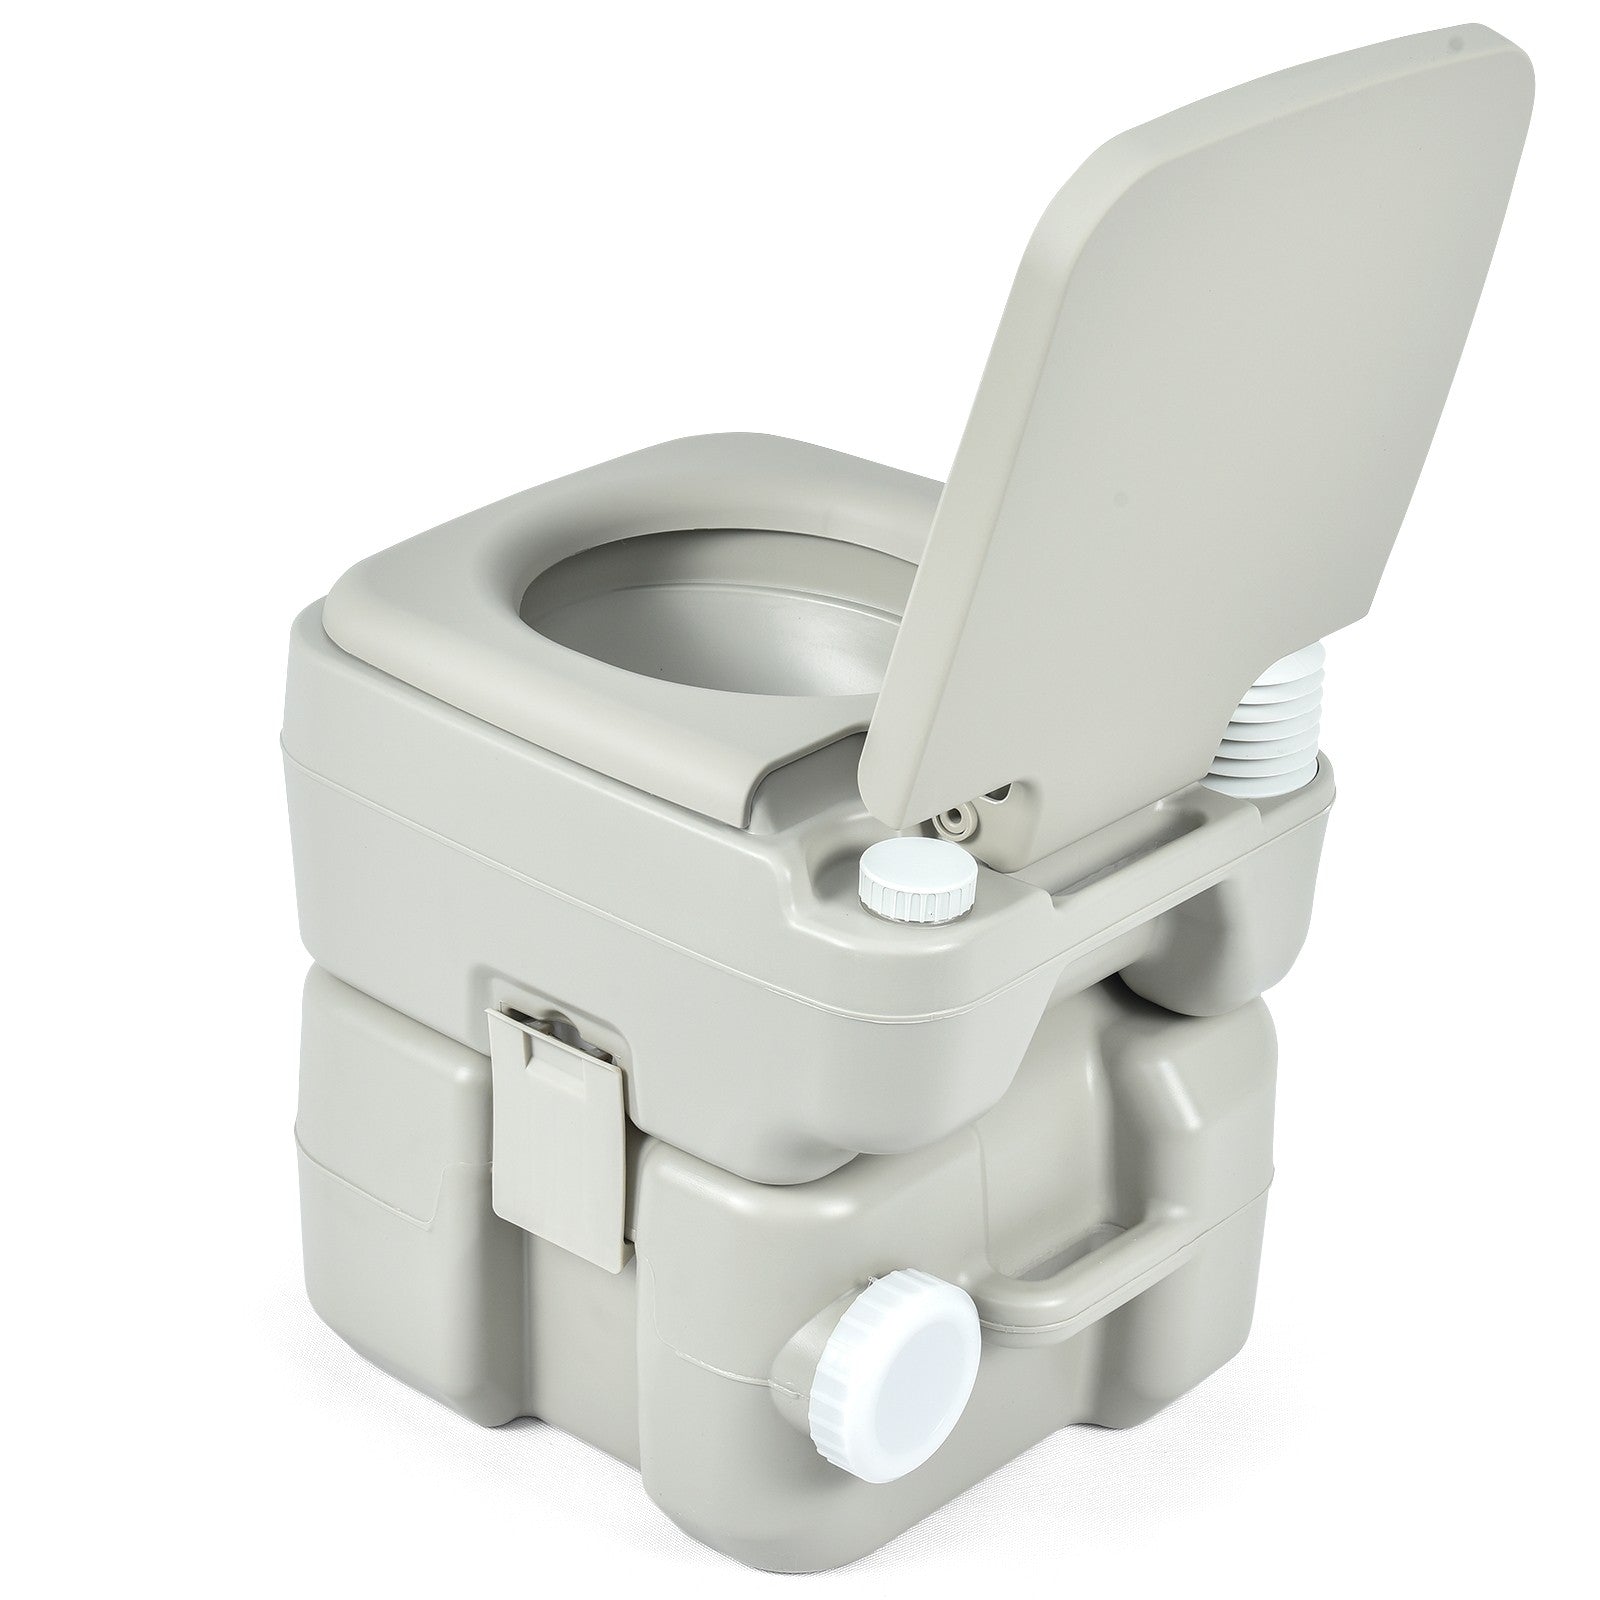 Portable Toilet 5.3 Gallon with Powerful Push Pump